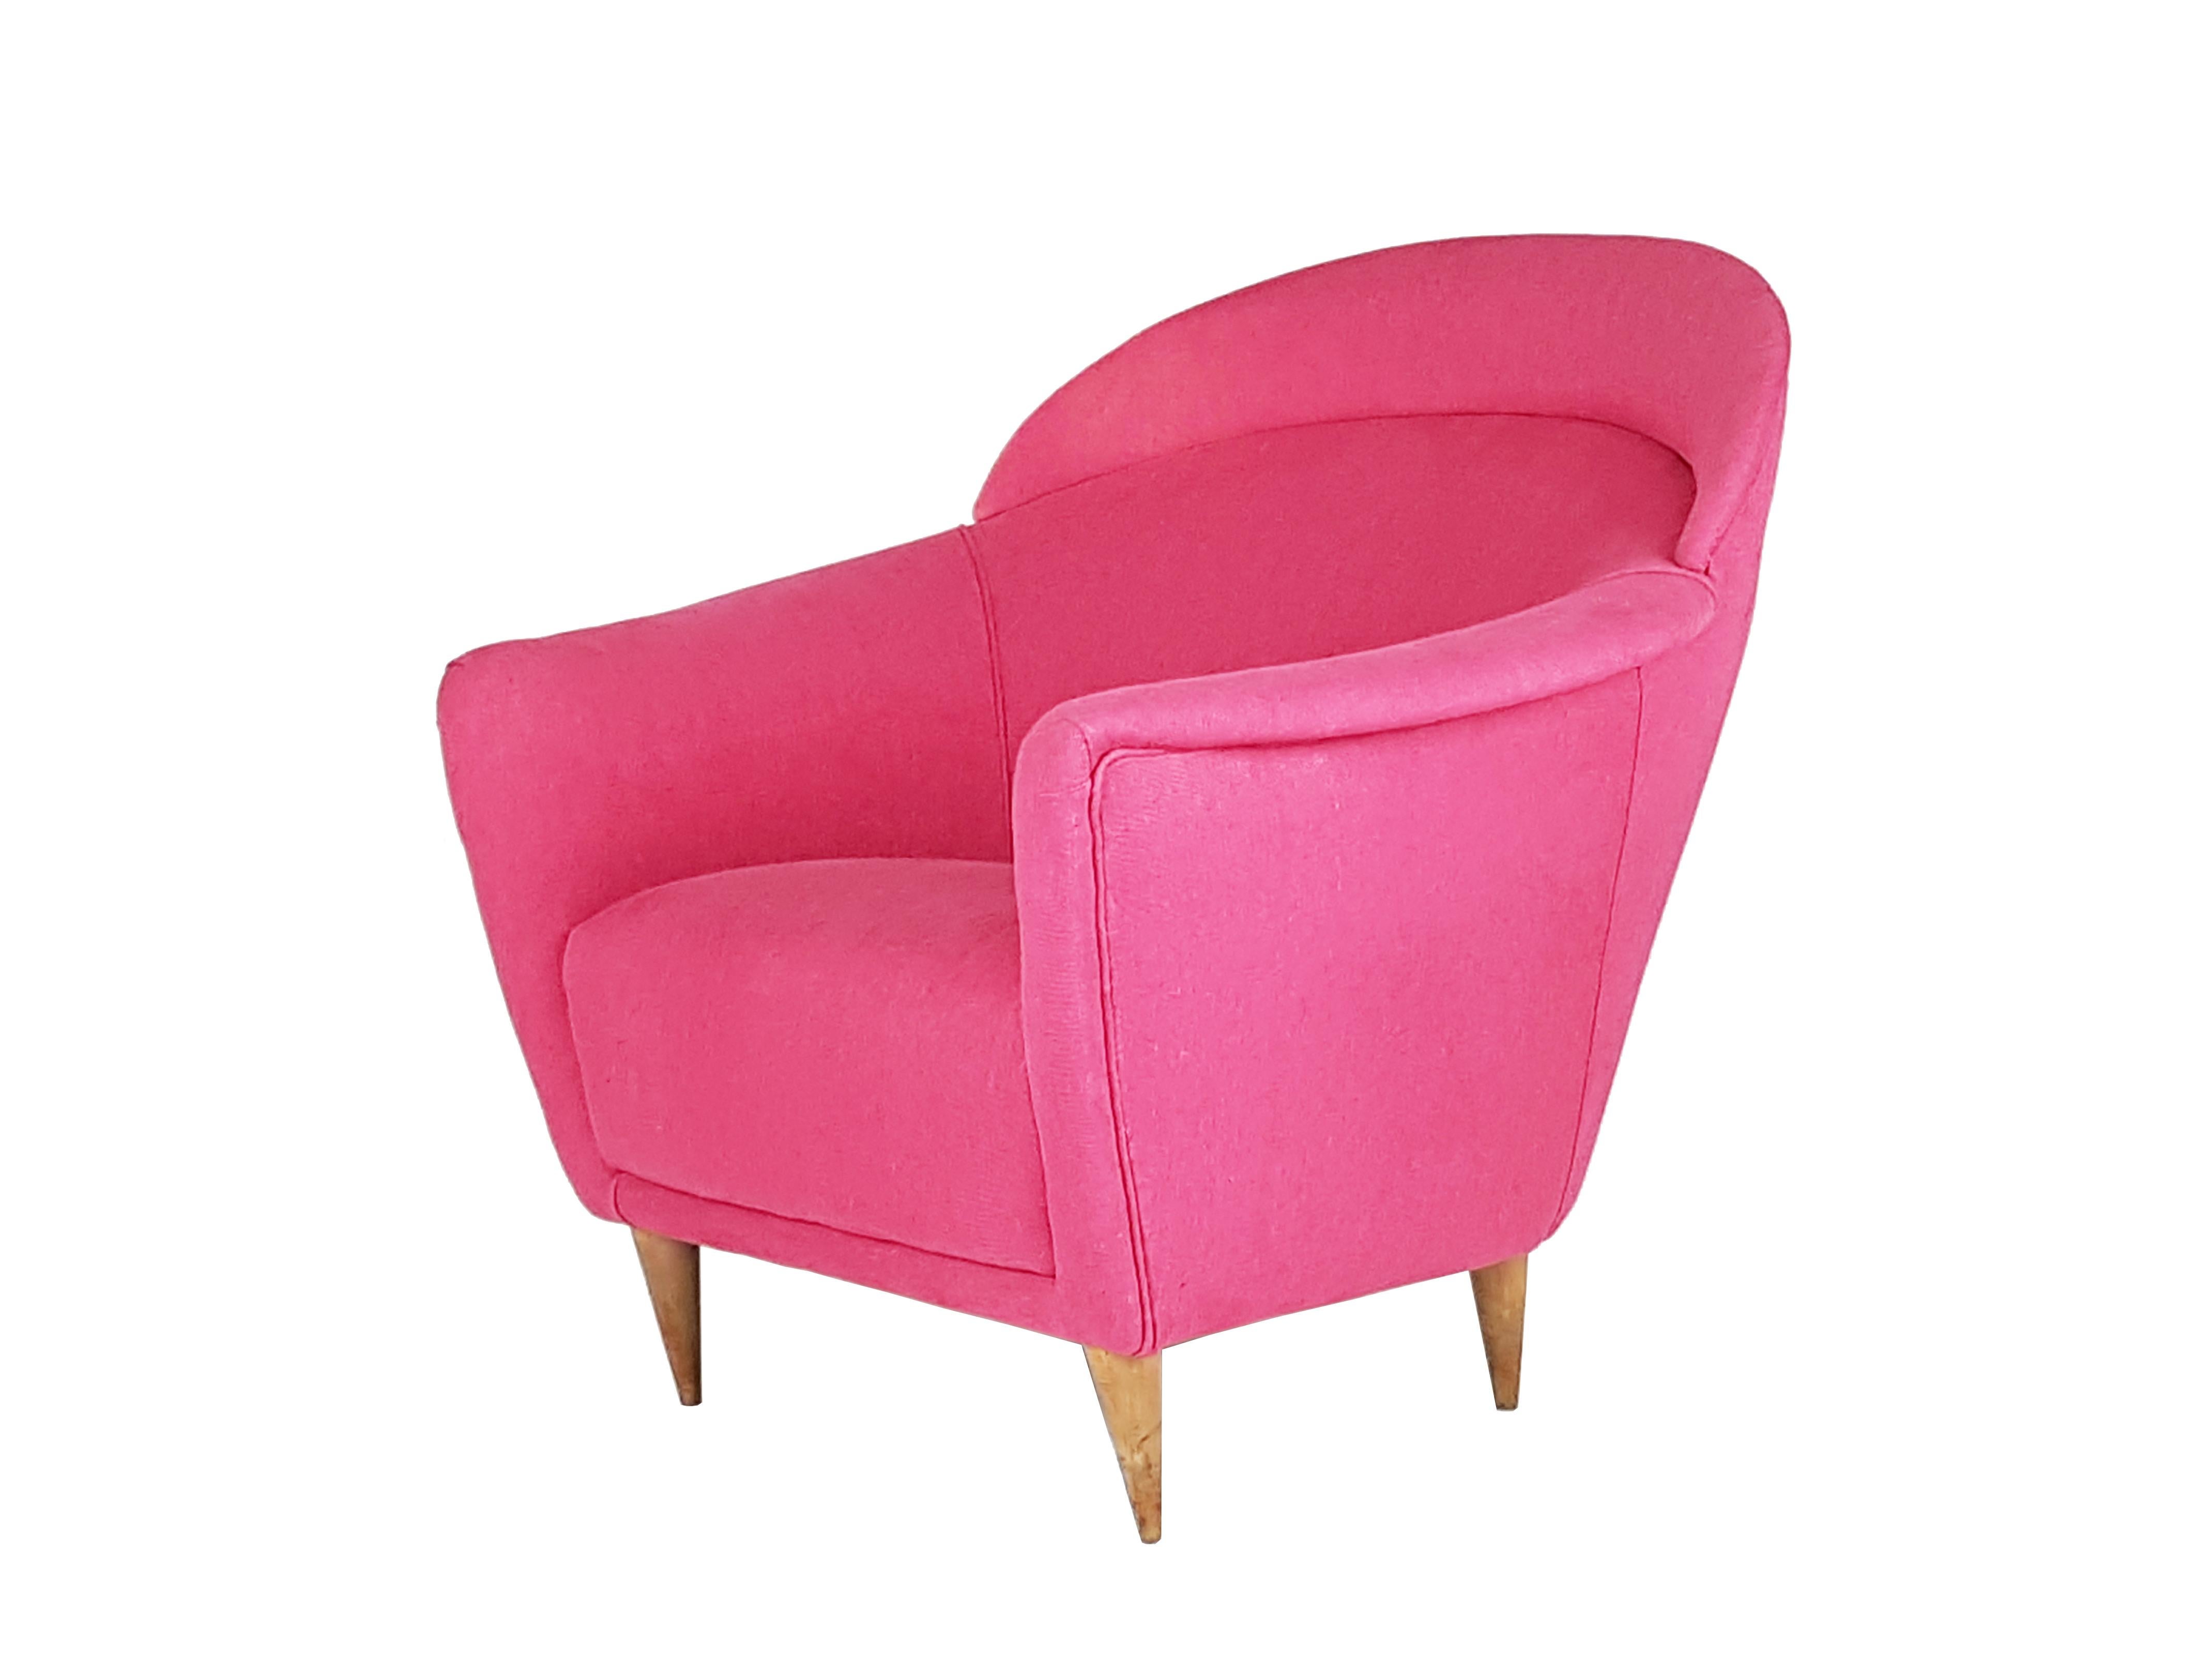 This beautiful cushioned armchair was design and produced in the 1950s. Its shape, style and quality resembles similar contemporary products design by Gio Ponti or Ico Parisi. The armchair has been re-upholstered with a hot pink 